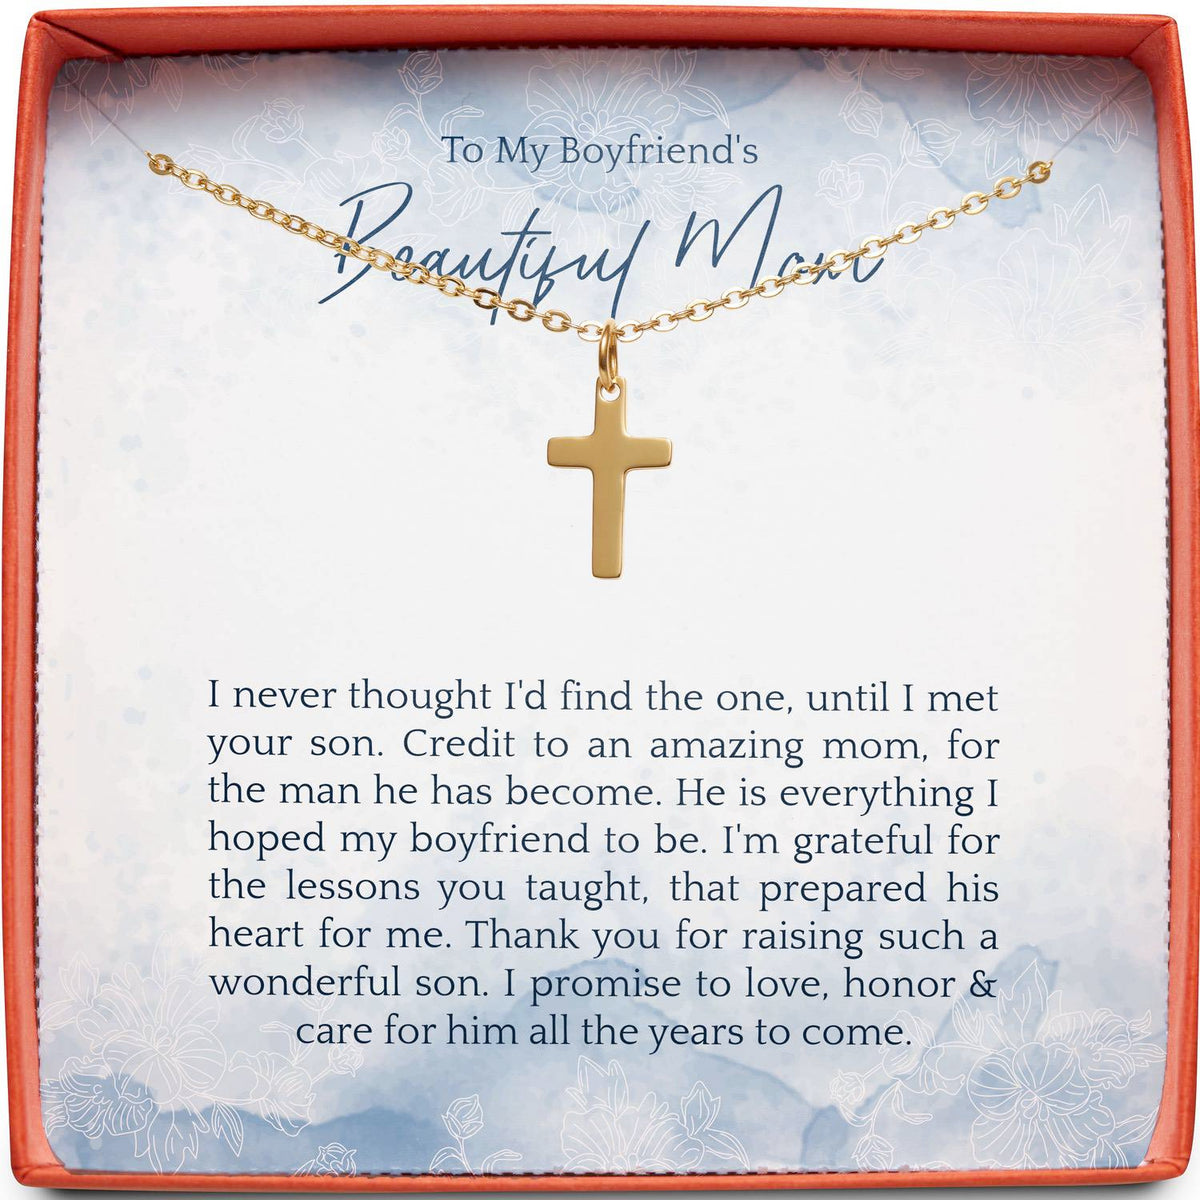  To My Boyfriends Mom Necklace, Gifts for My Boyfriends Mom,  Necklace For Boyfriends Mom, Boyfriend Mom Mothers Day Gift, Boyfriends Mom  Christmas Gifts From Girlfriend, To My Husbands Mom Necklace (A